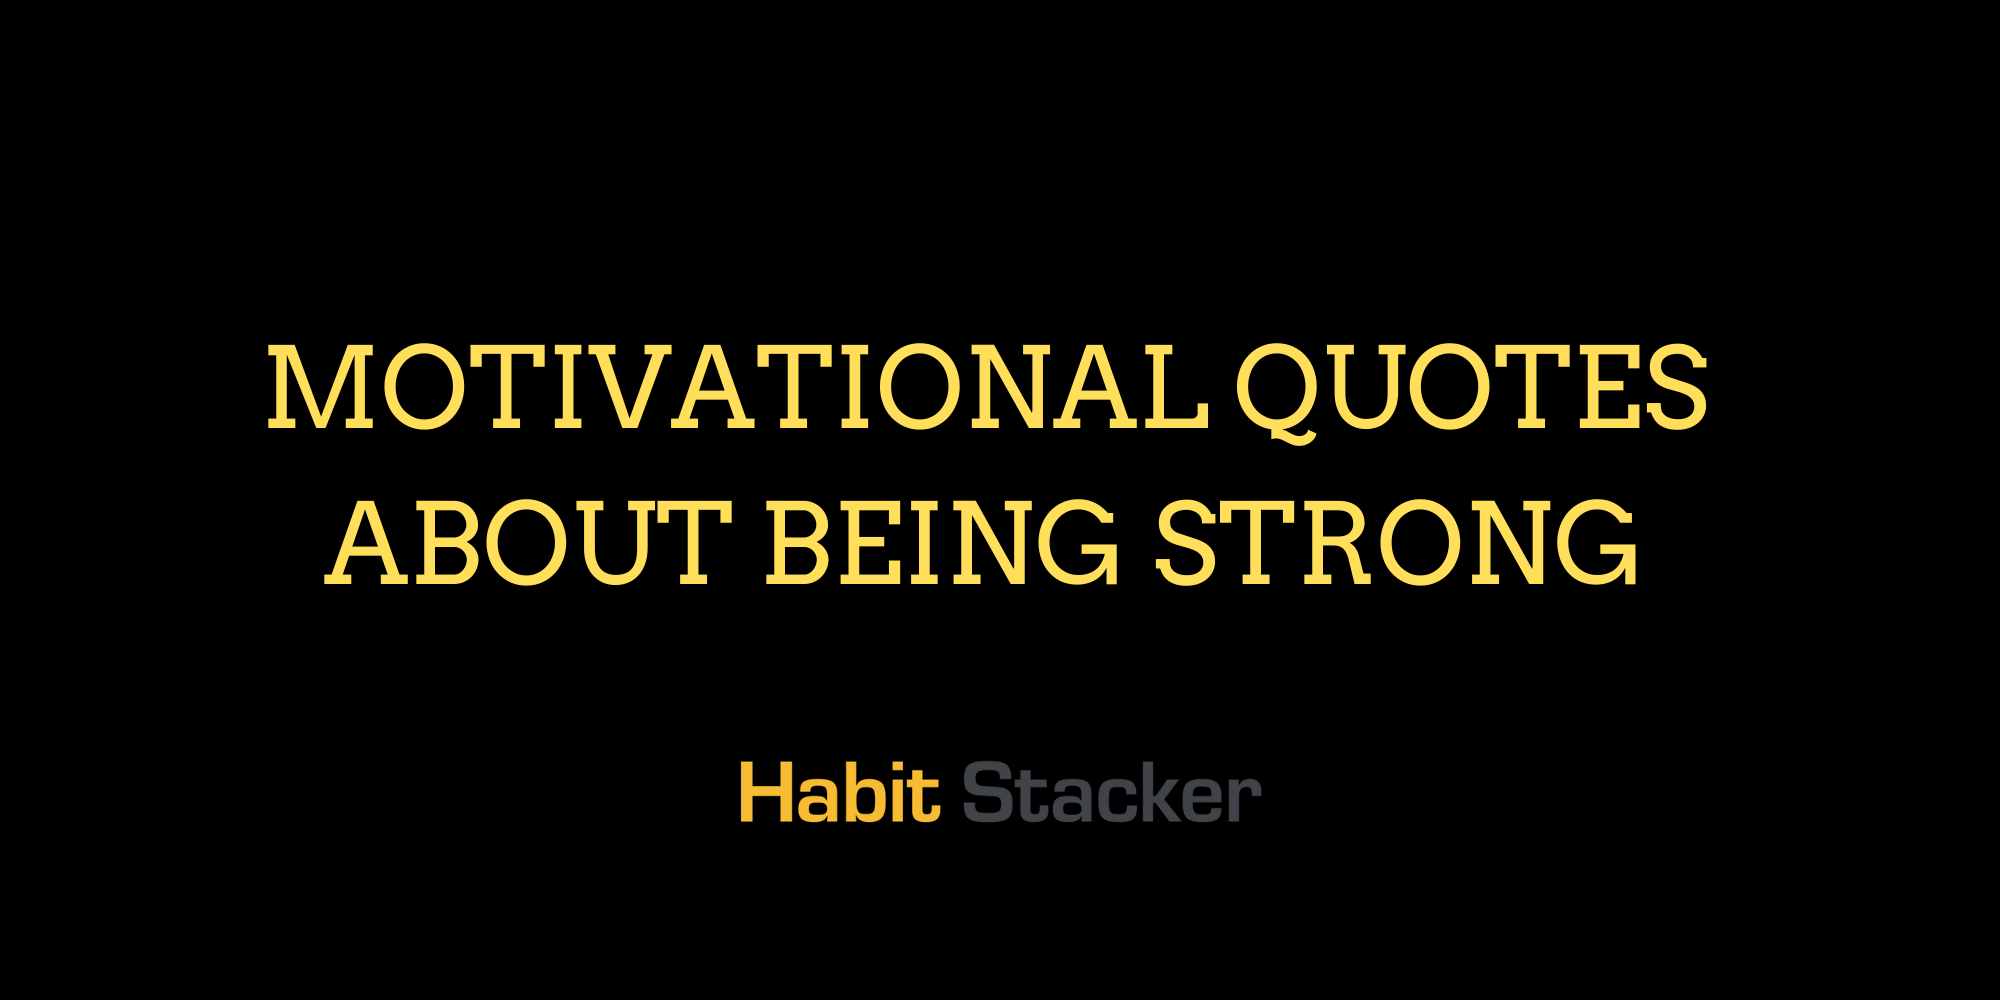 36 Motivational Quotes About Being Strong - Habit Stacker